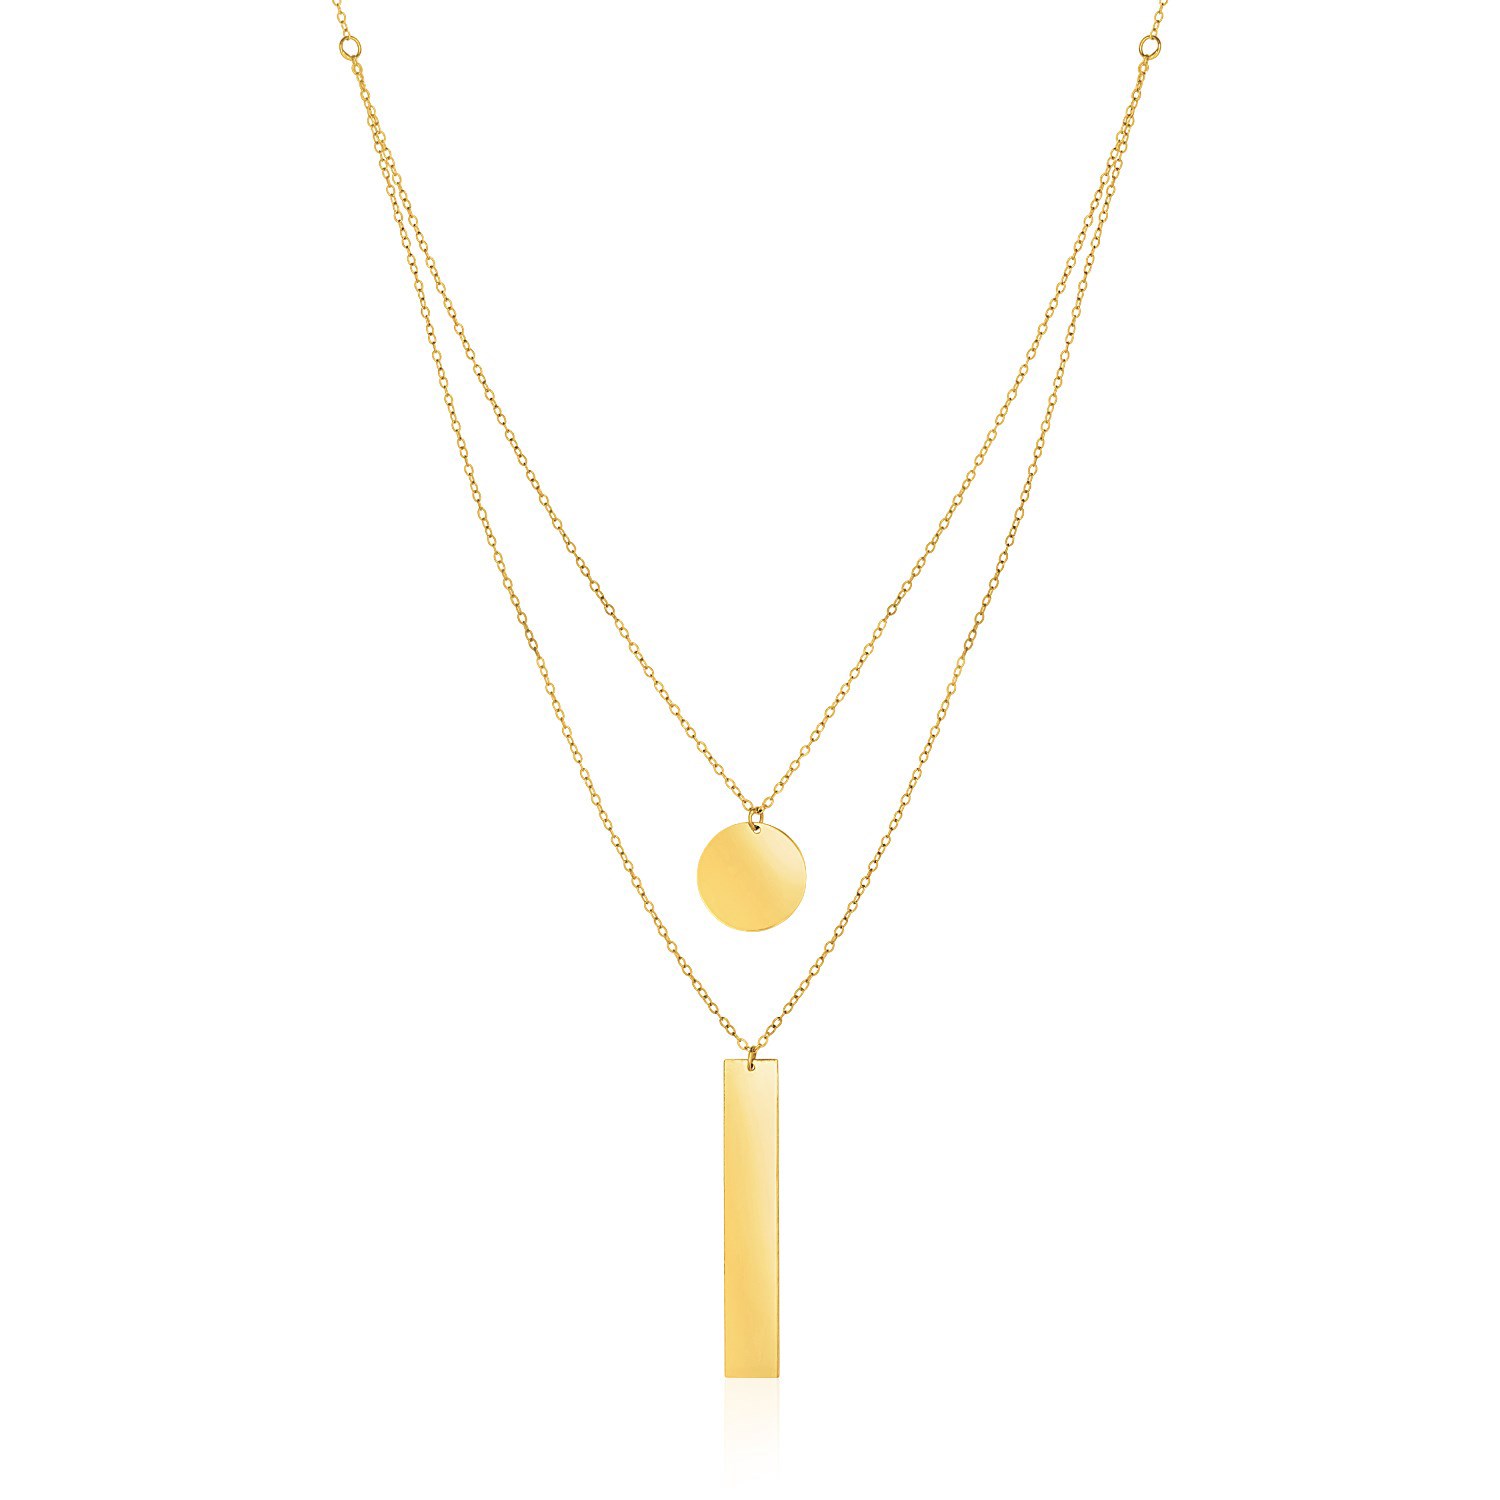 14k Yellow Gold 18 inch Two Strand Necklace with Circle and Bar Pendants